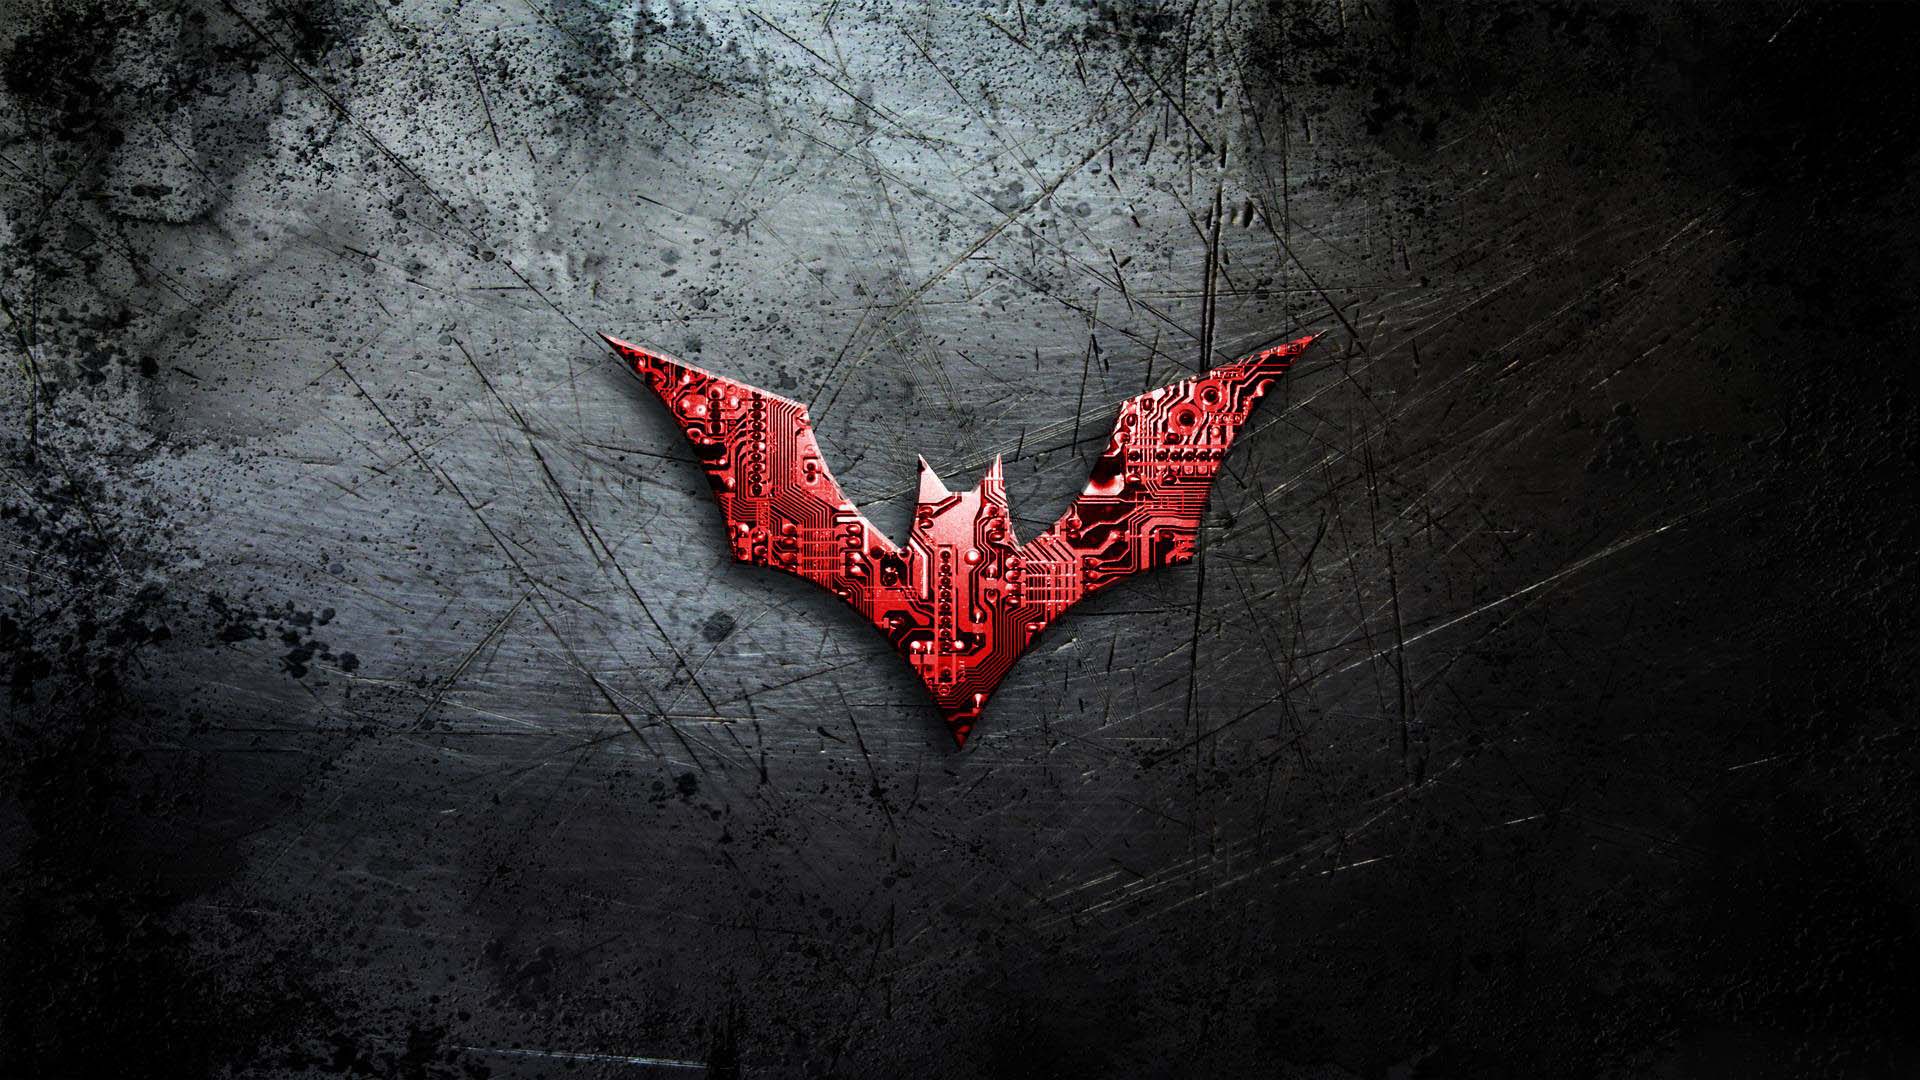 Bat with Red Background Logo - 50 Batman Logo wallpapers For Free Download (HD 1080p)